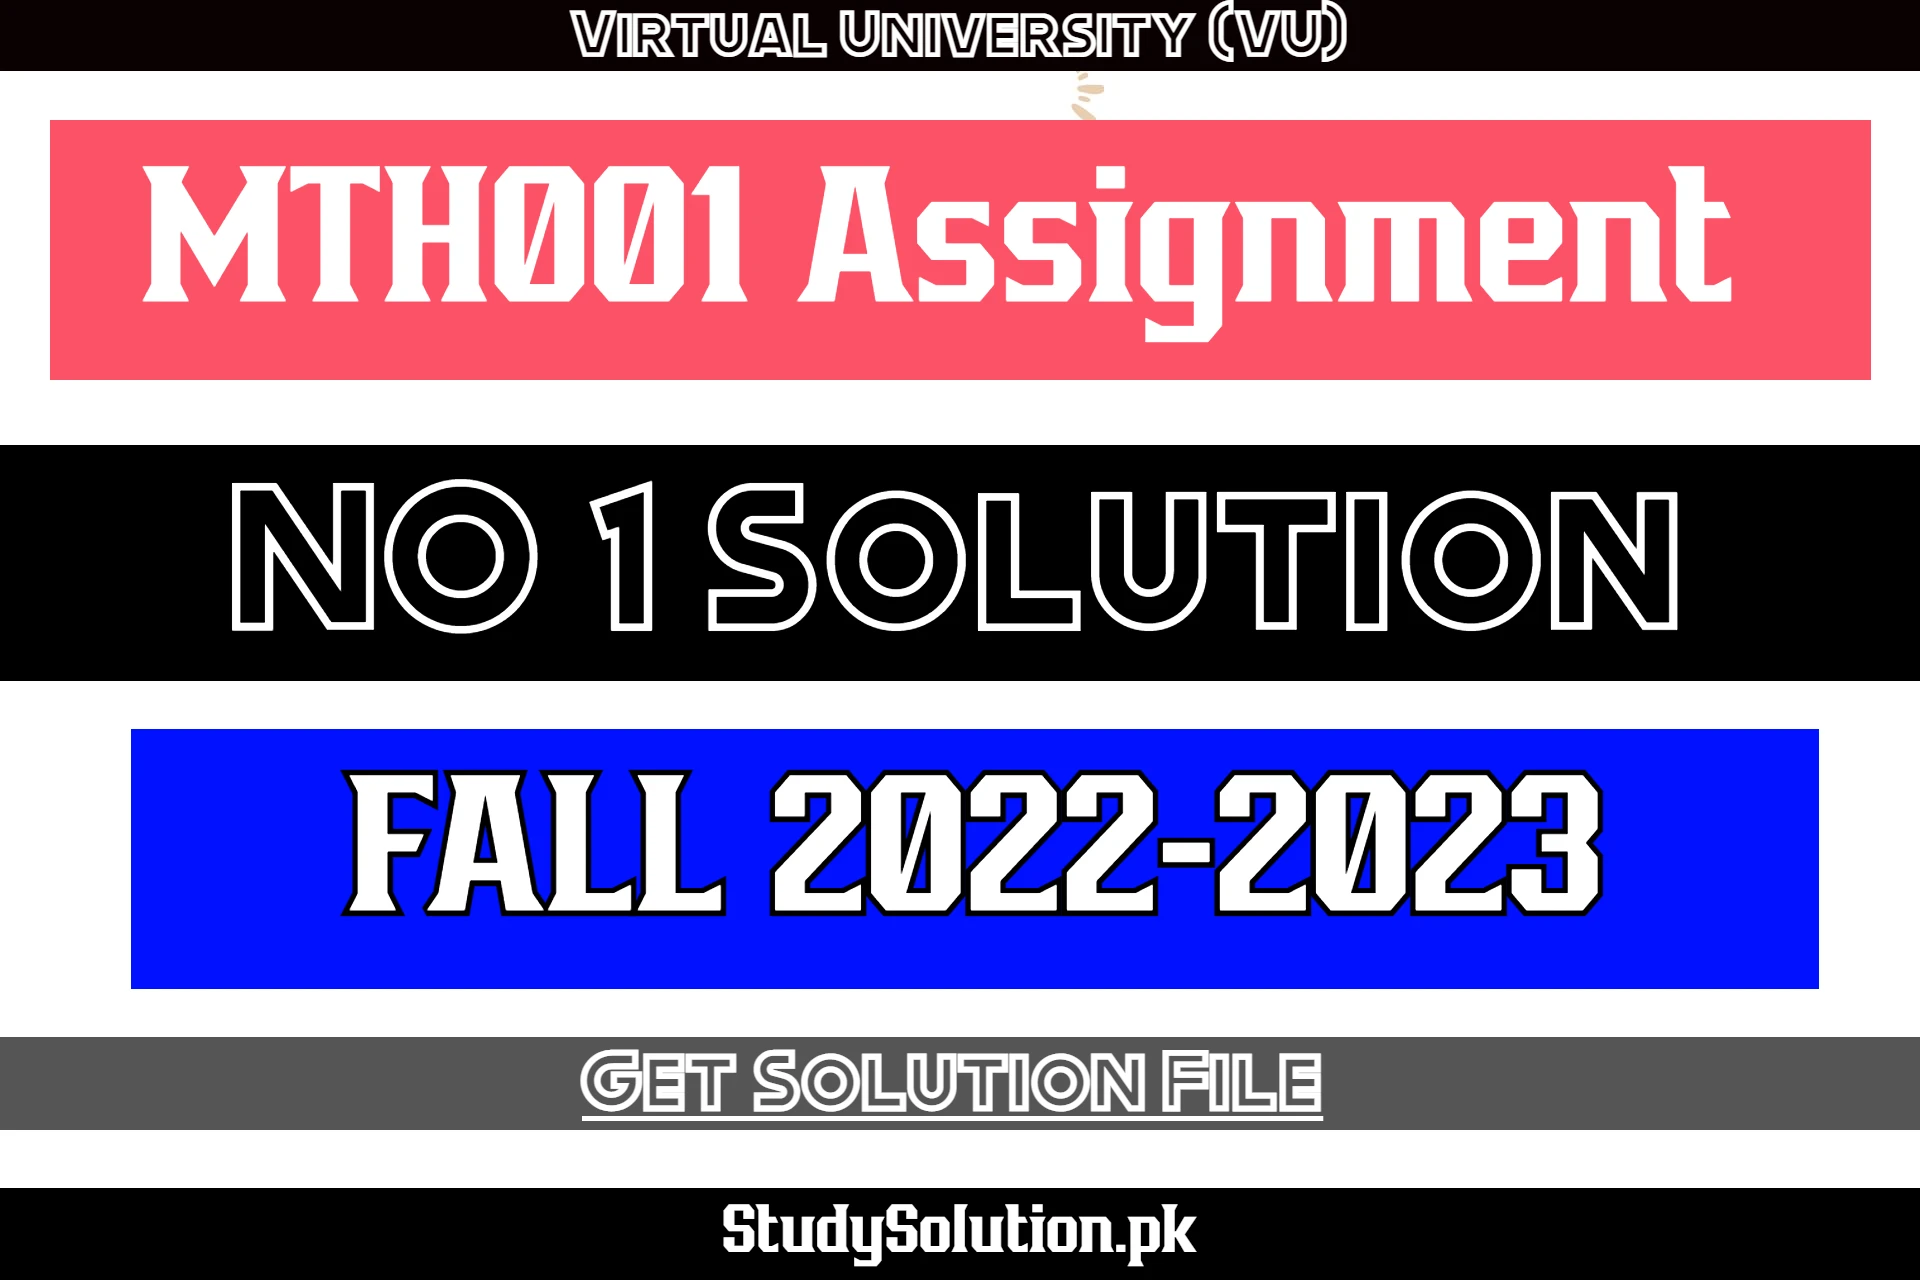 MTH001 Assignment No 1 Solution Fall 2022